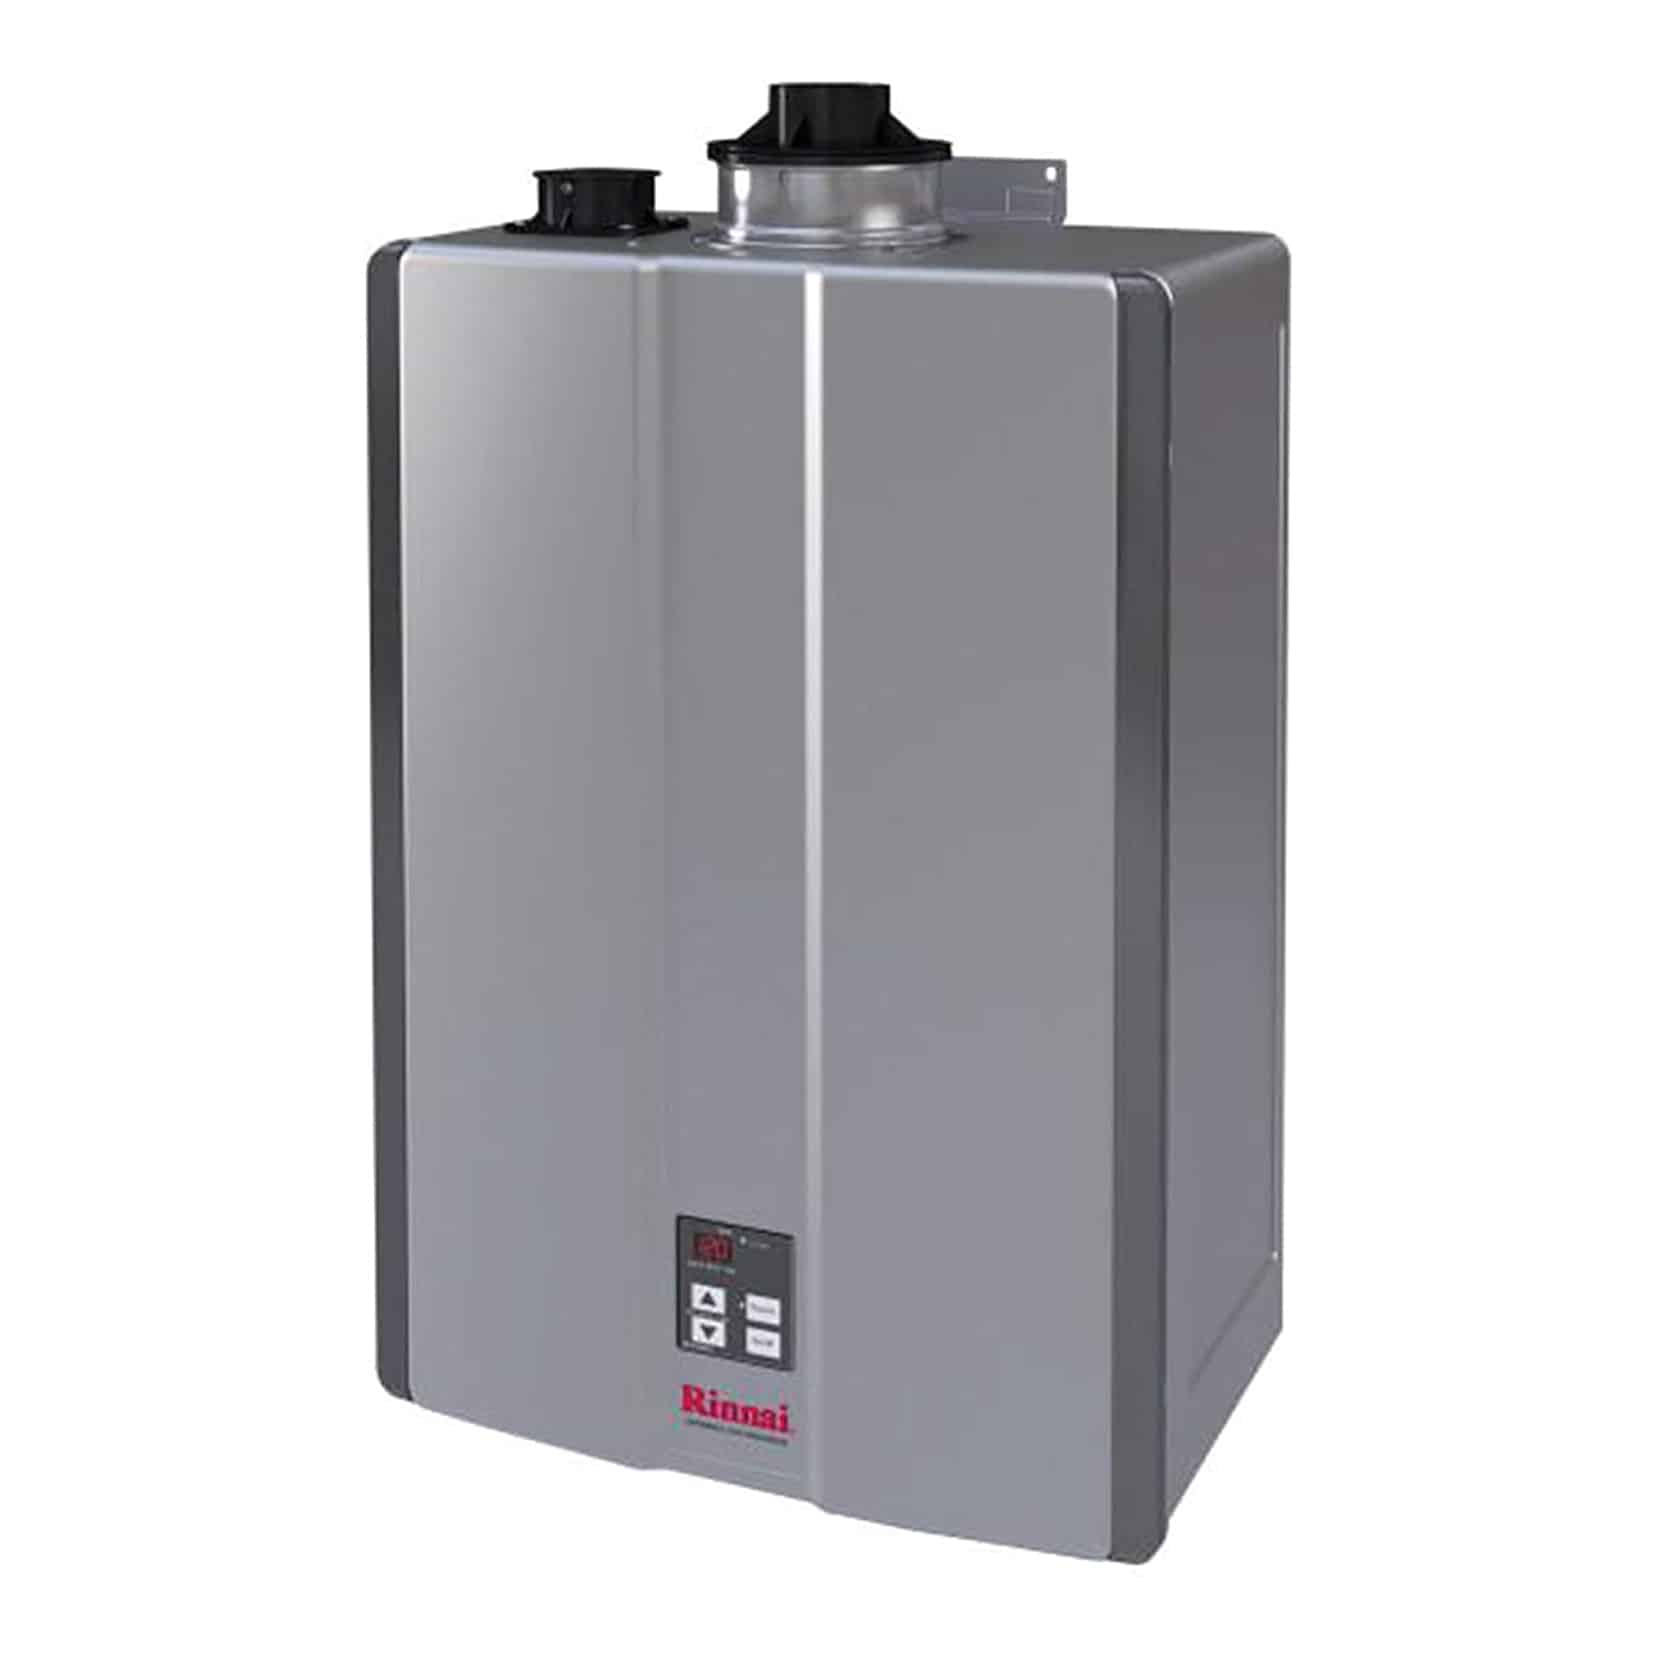 Best Electric Tankless Water Heaters In Reviews